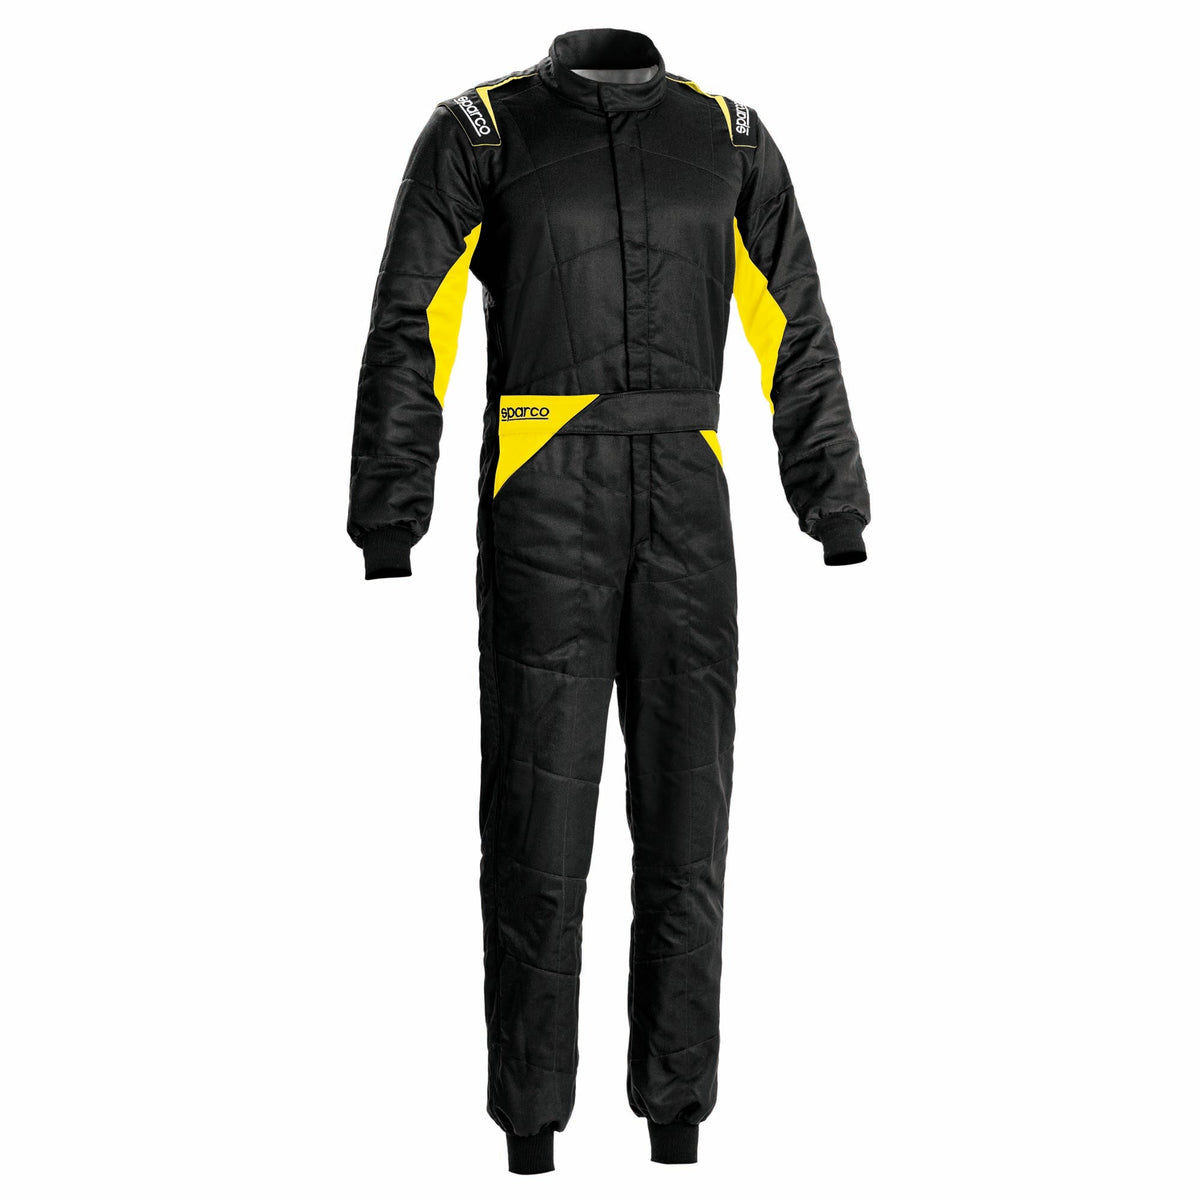 Sparco Sprint Racing Suit - Black/Yellow